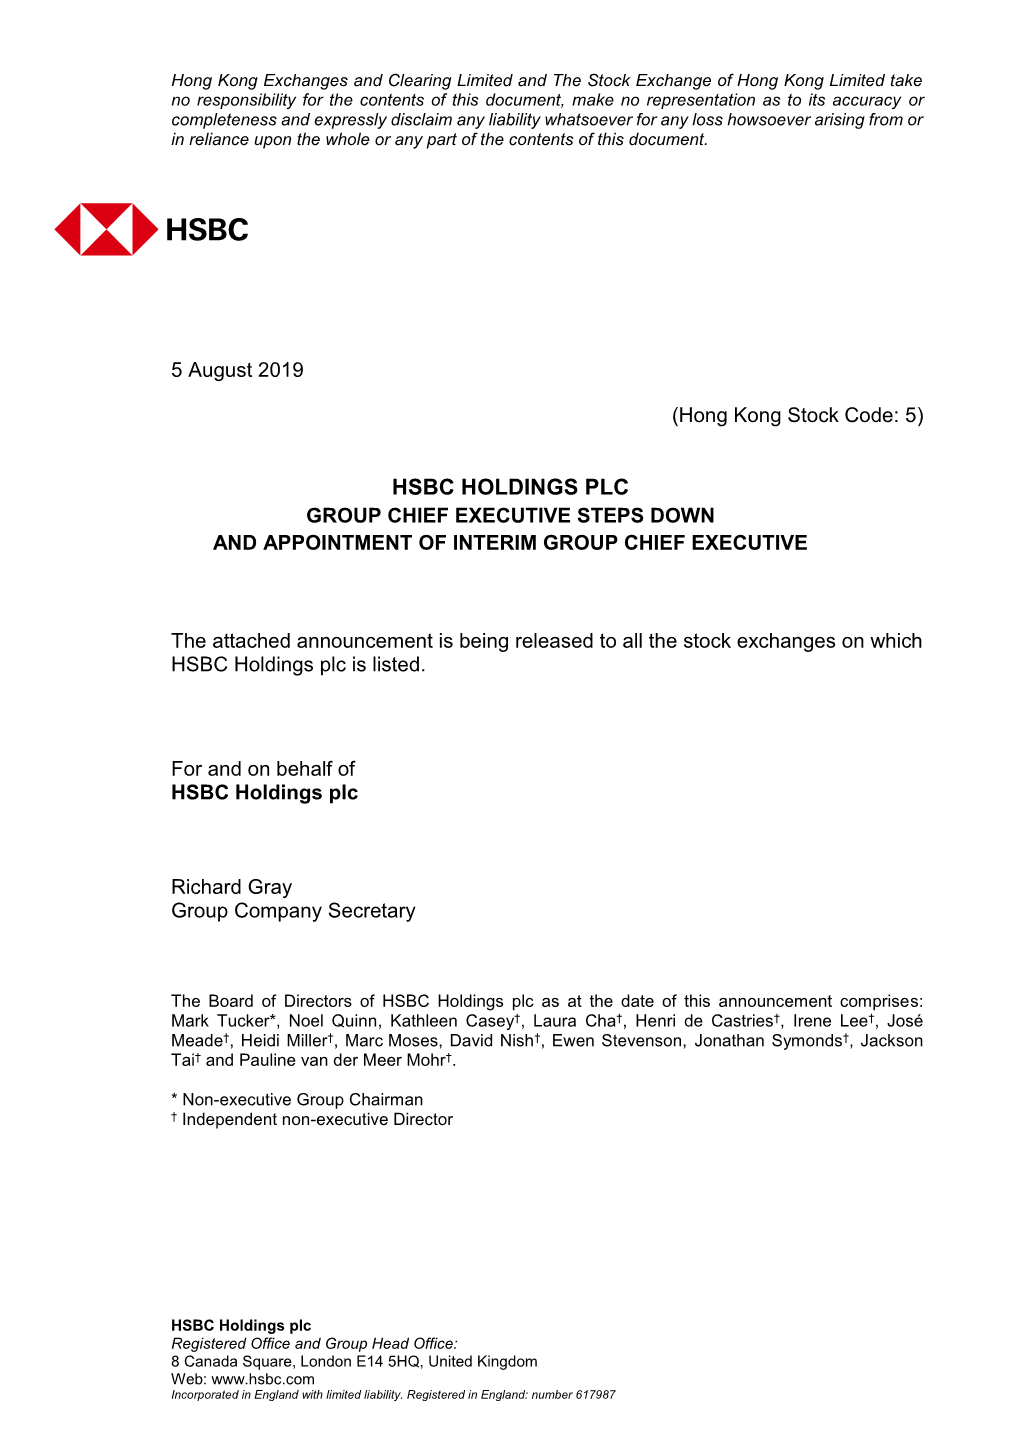 Hsbc Holdings Plc Group Chief Executive Steps Down and Appointment of Interim Group Chief Executive